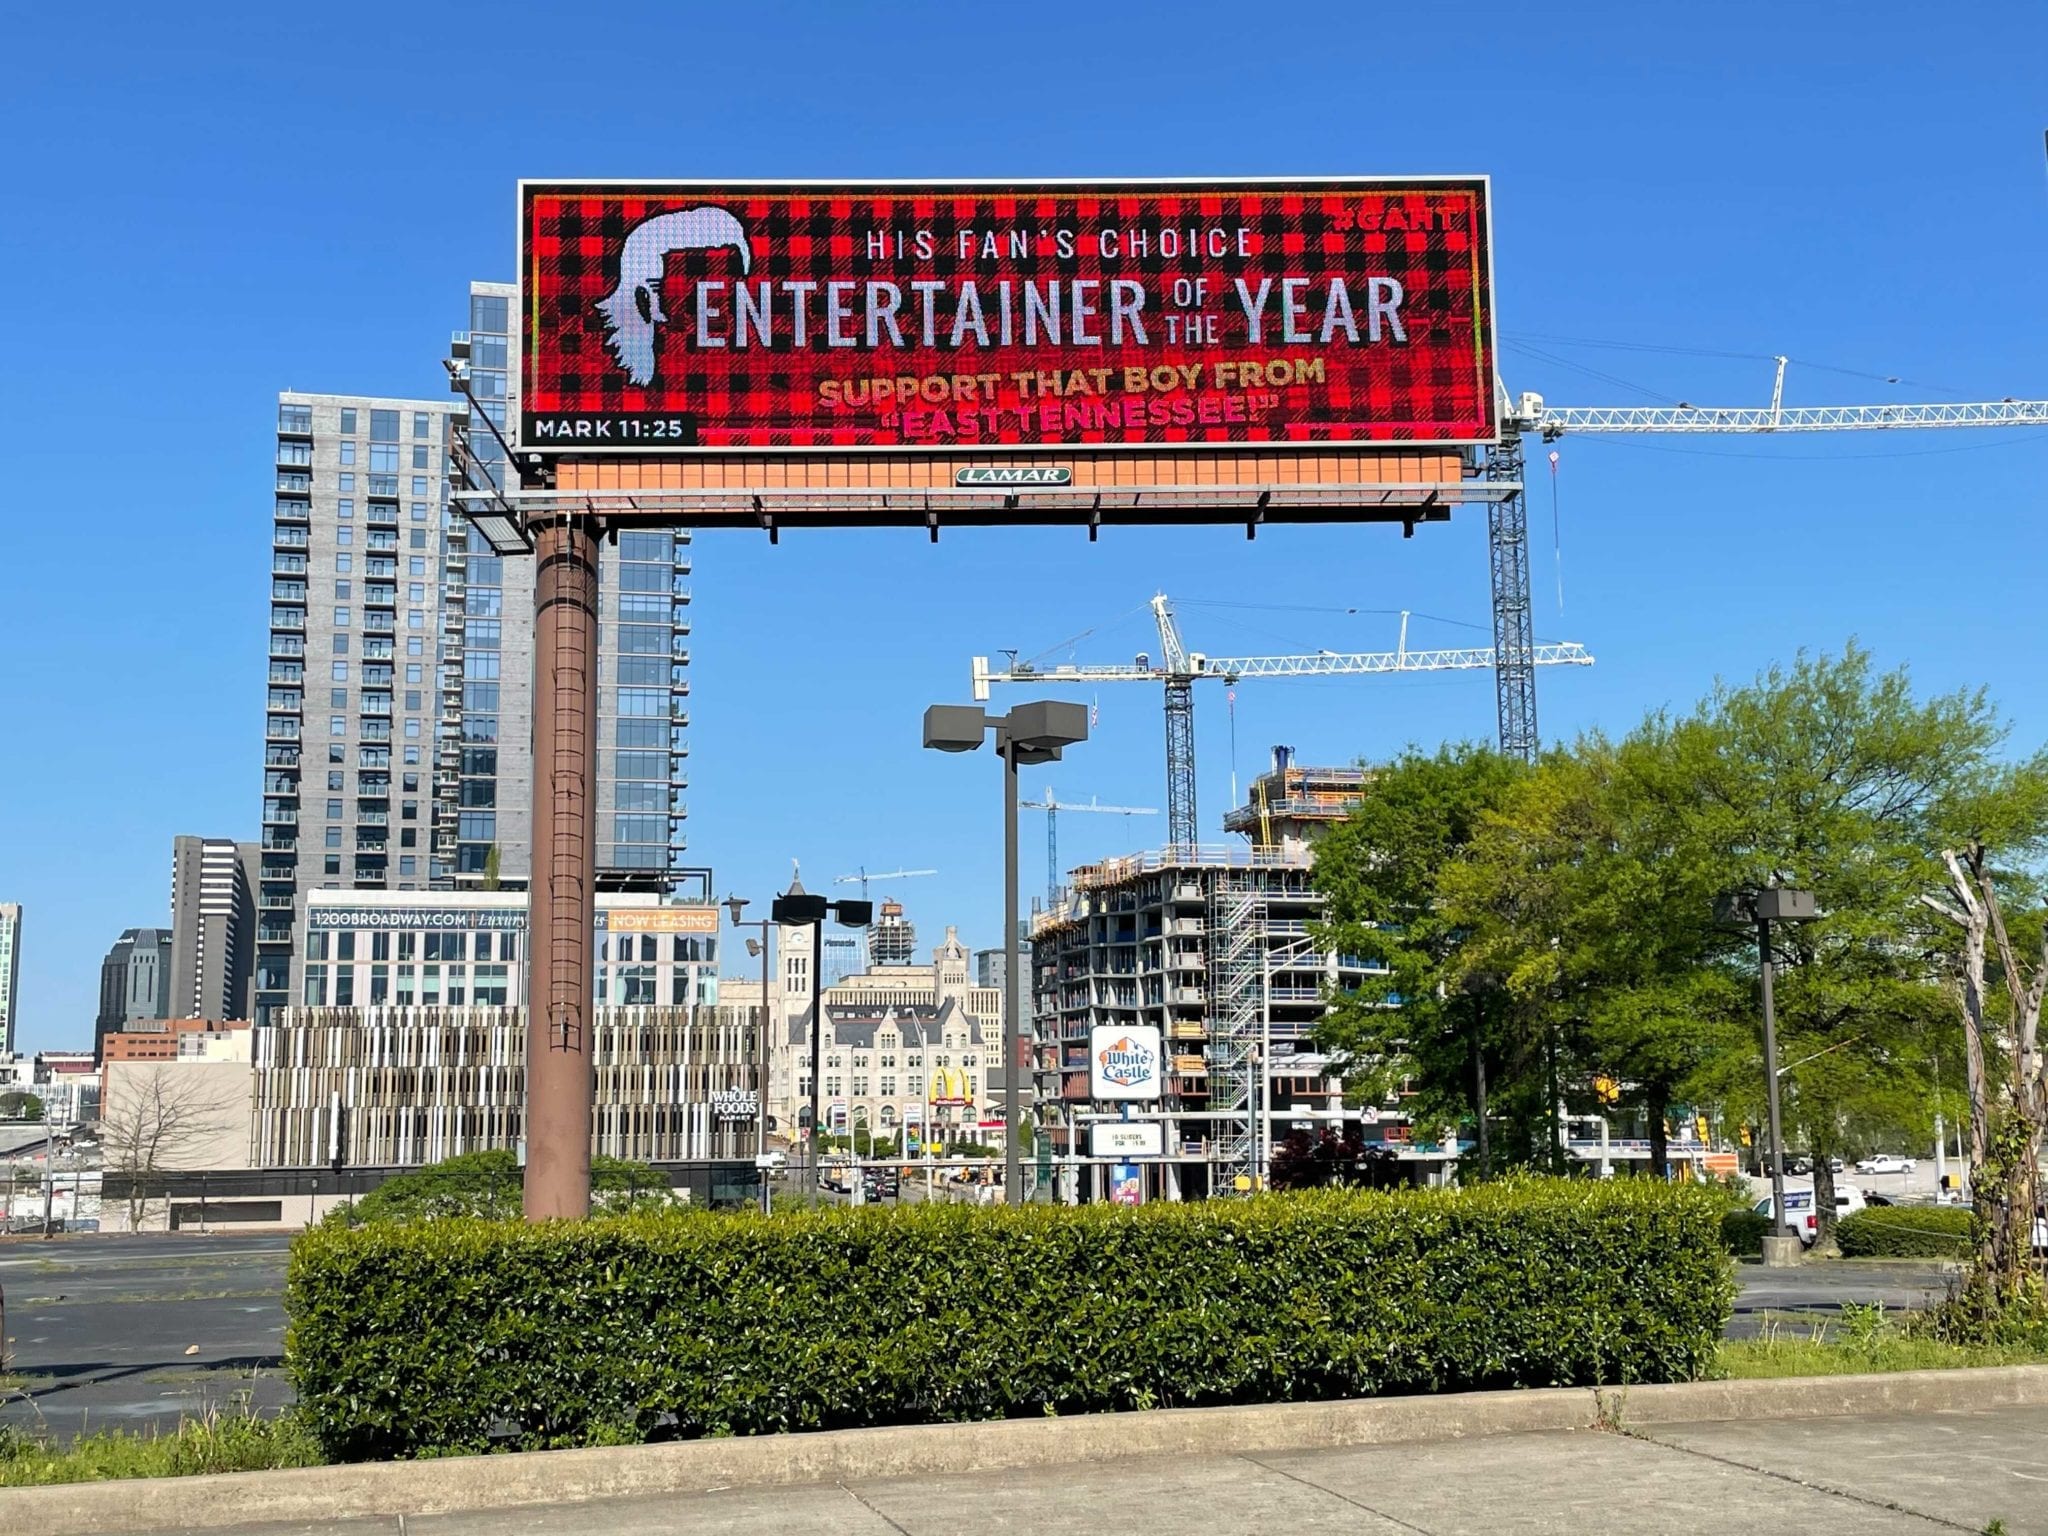 A large red sign with a city skyline in the background